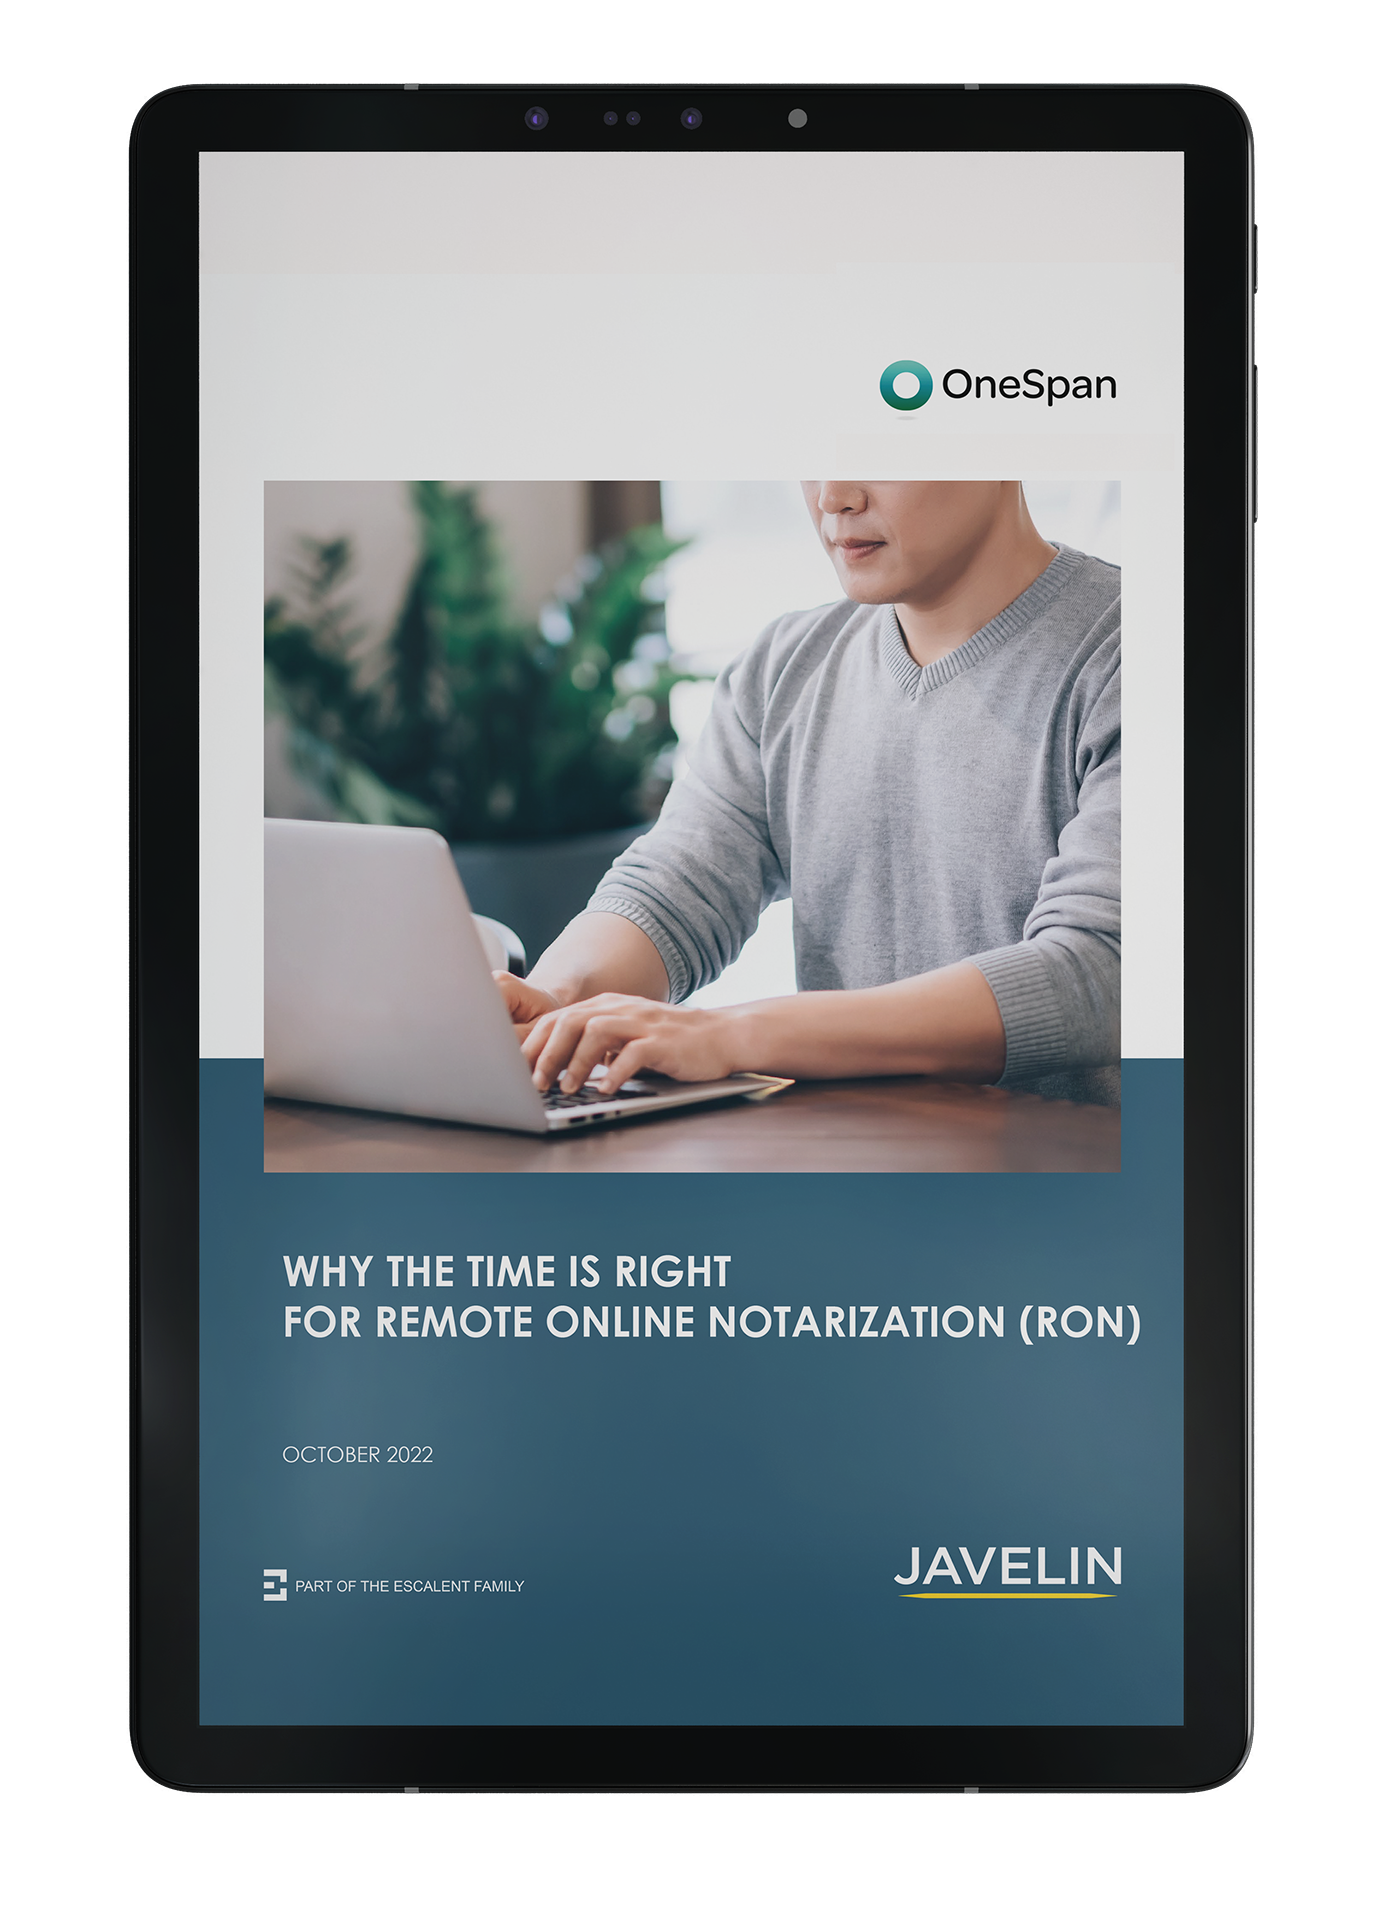 Javelin Strategy & Research - Why the time is right for remote online notarization